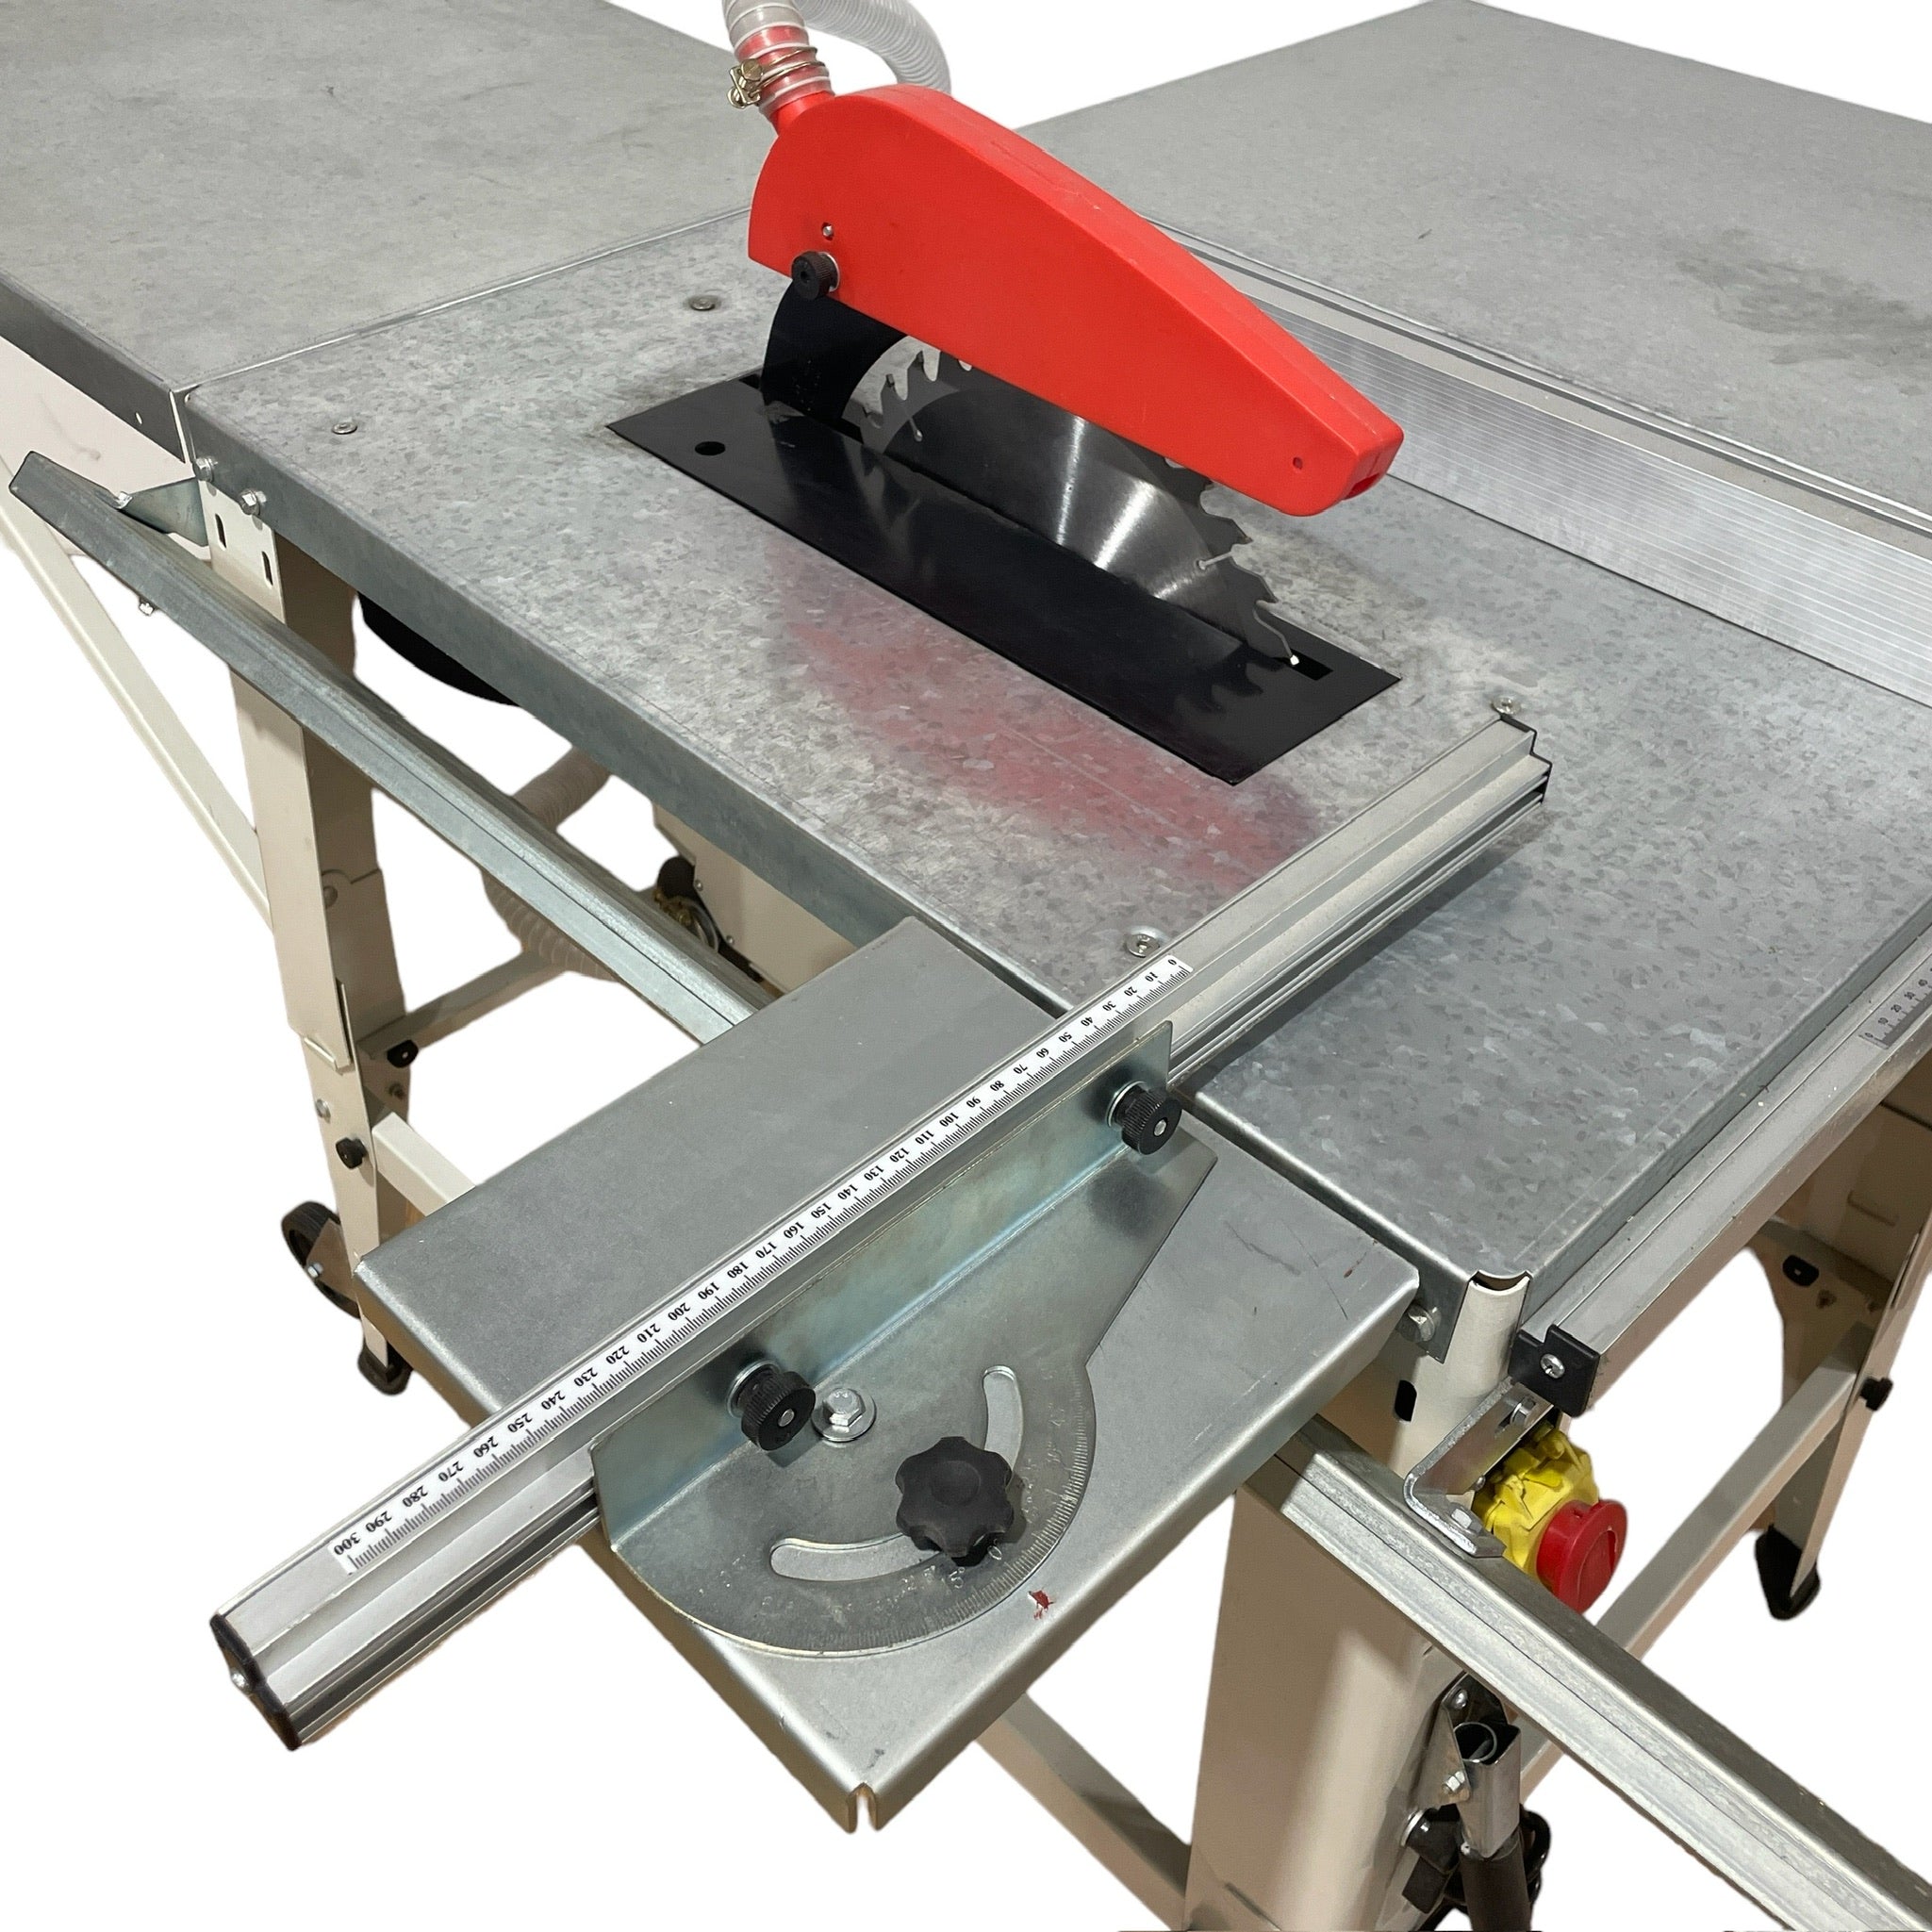 315mm (12") Table Saw 3HP 240V CSB315E by Oltre